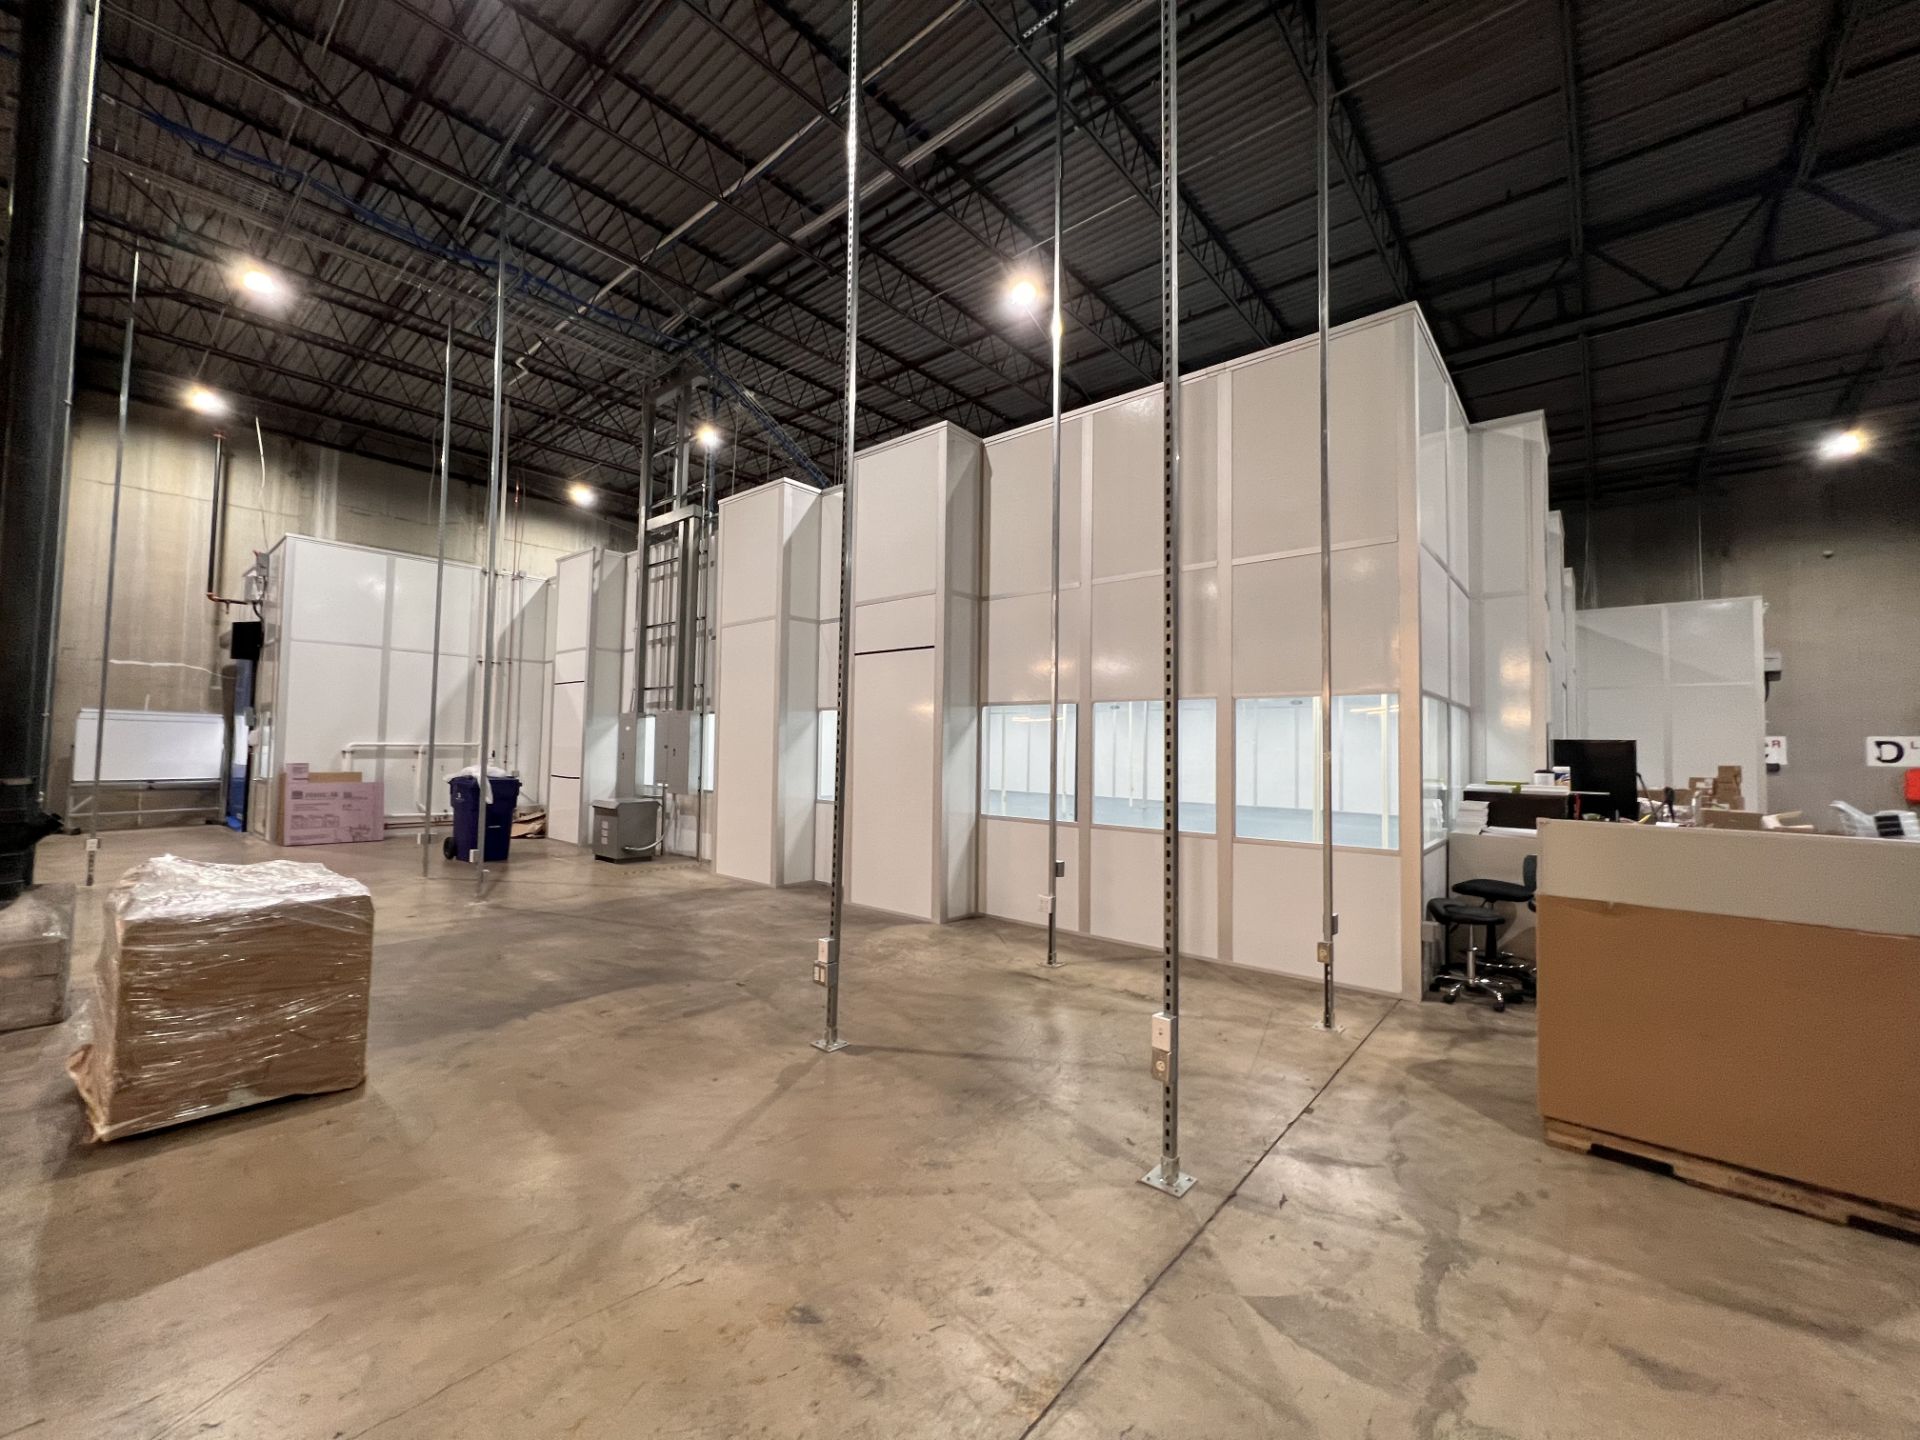 MODULAR CLEAN ROOM, APPROX. 60 FT X 60 FT X 11 FT 10 IN, INCLUDES HEPA FILTRATION UNITS - Image 2 of 34